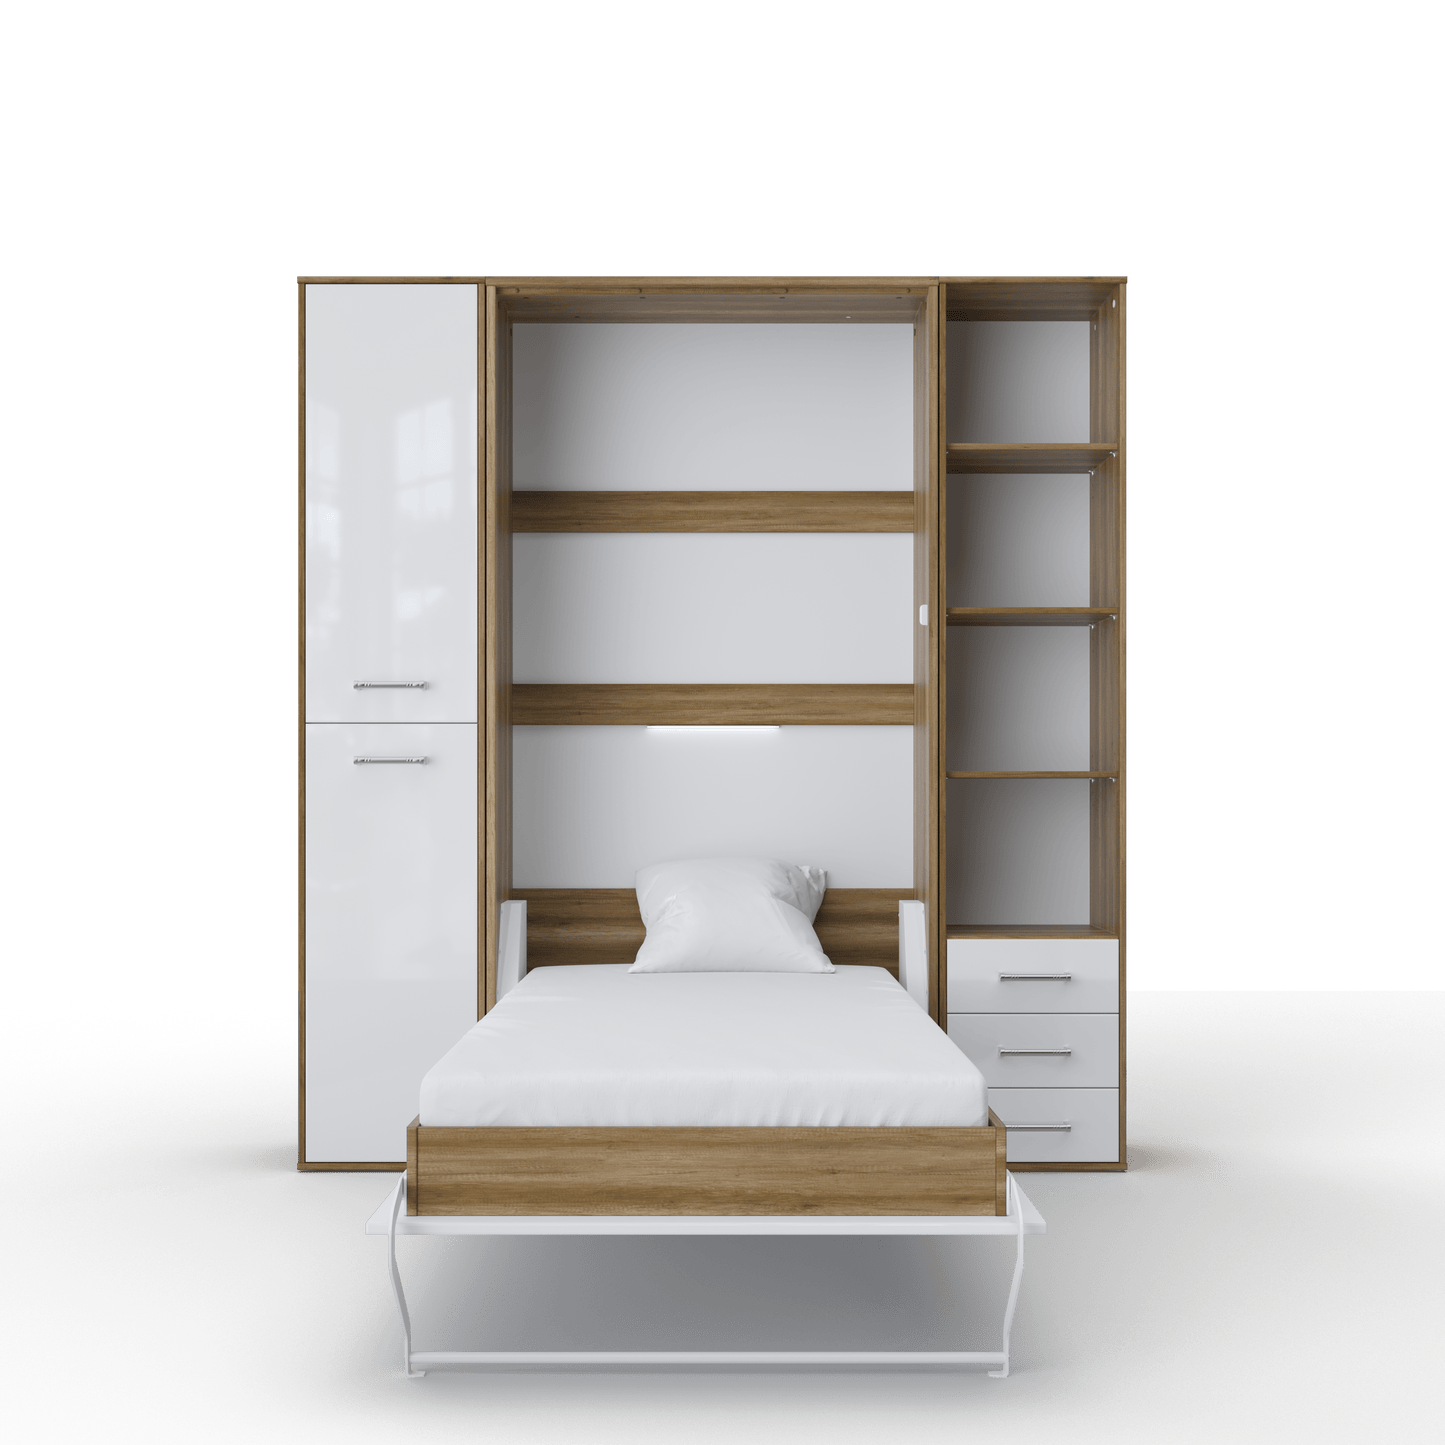 Maxima House Vertical Murphy Bed Invento, European Queen Size with mattress and 2 storage cabinets